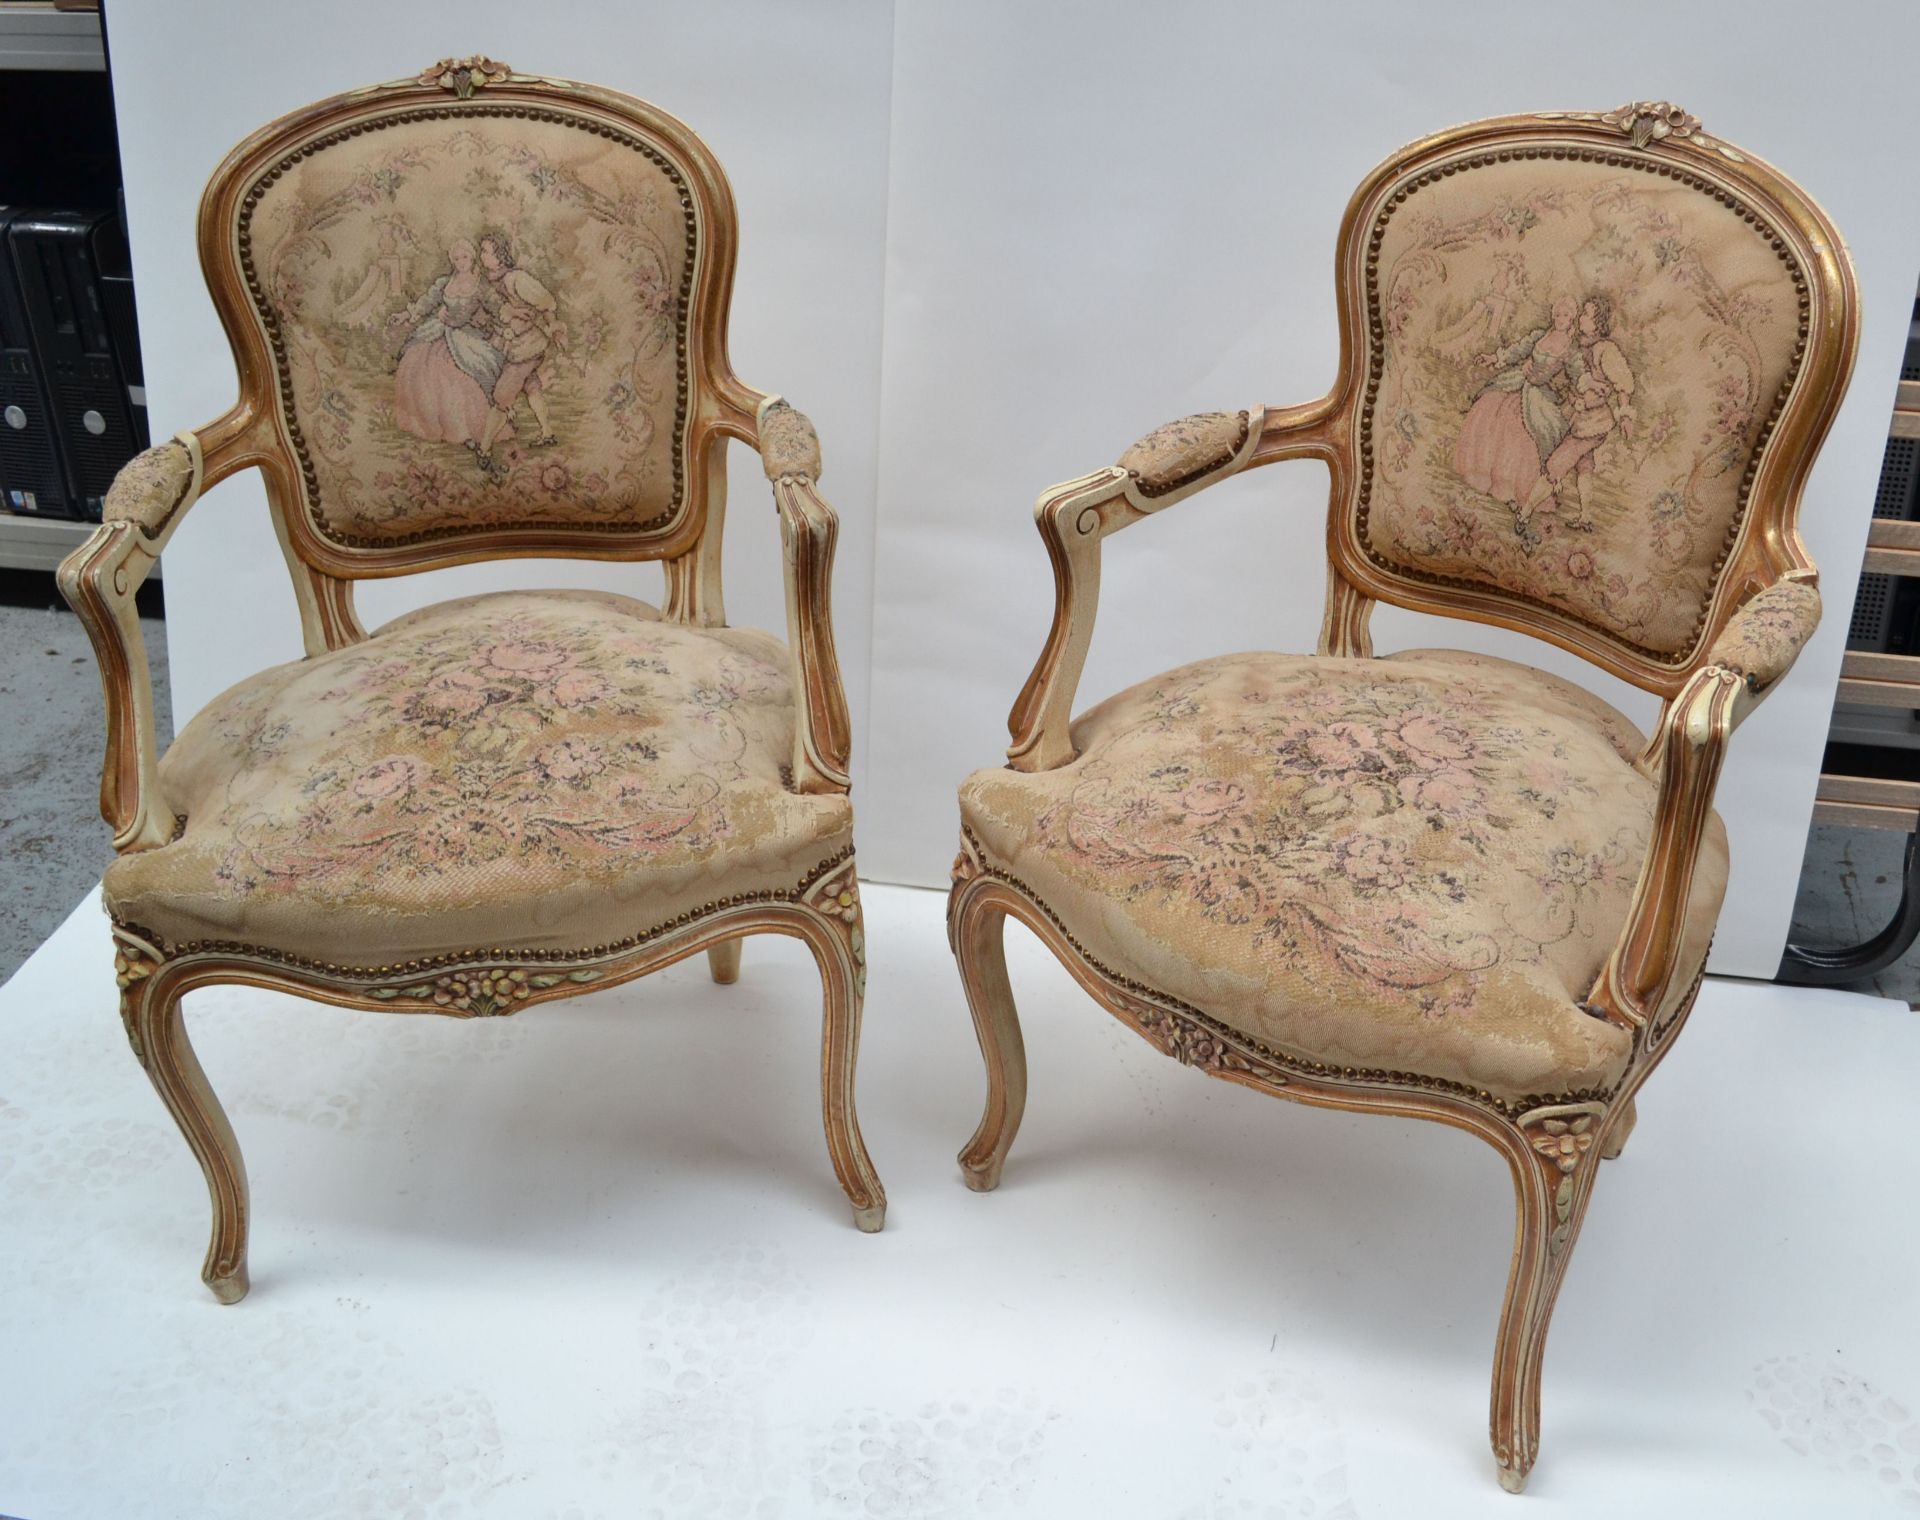 2 x Attractive Waring & Gillow Vintage Chairs - AE002 - CL007 - Location: Altrincham WA14